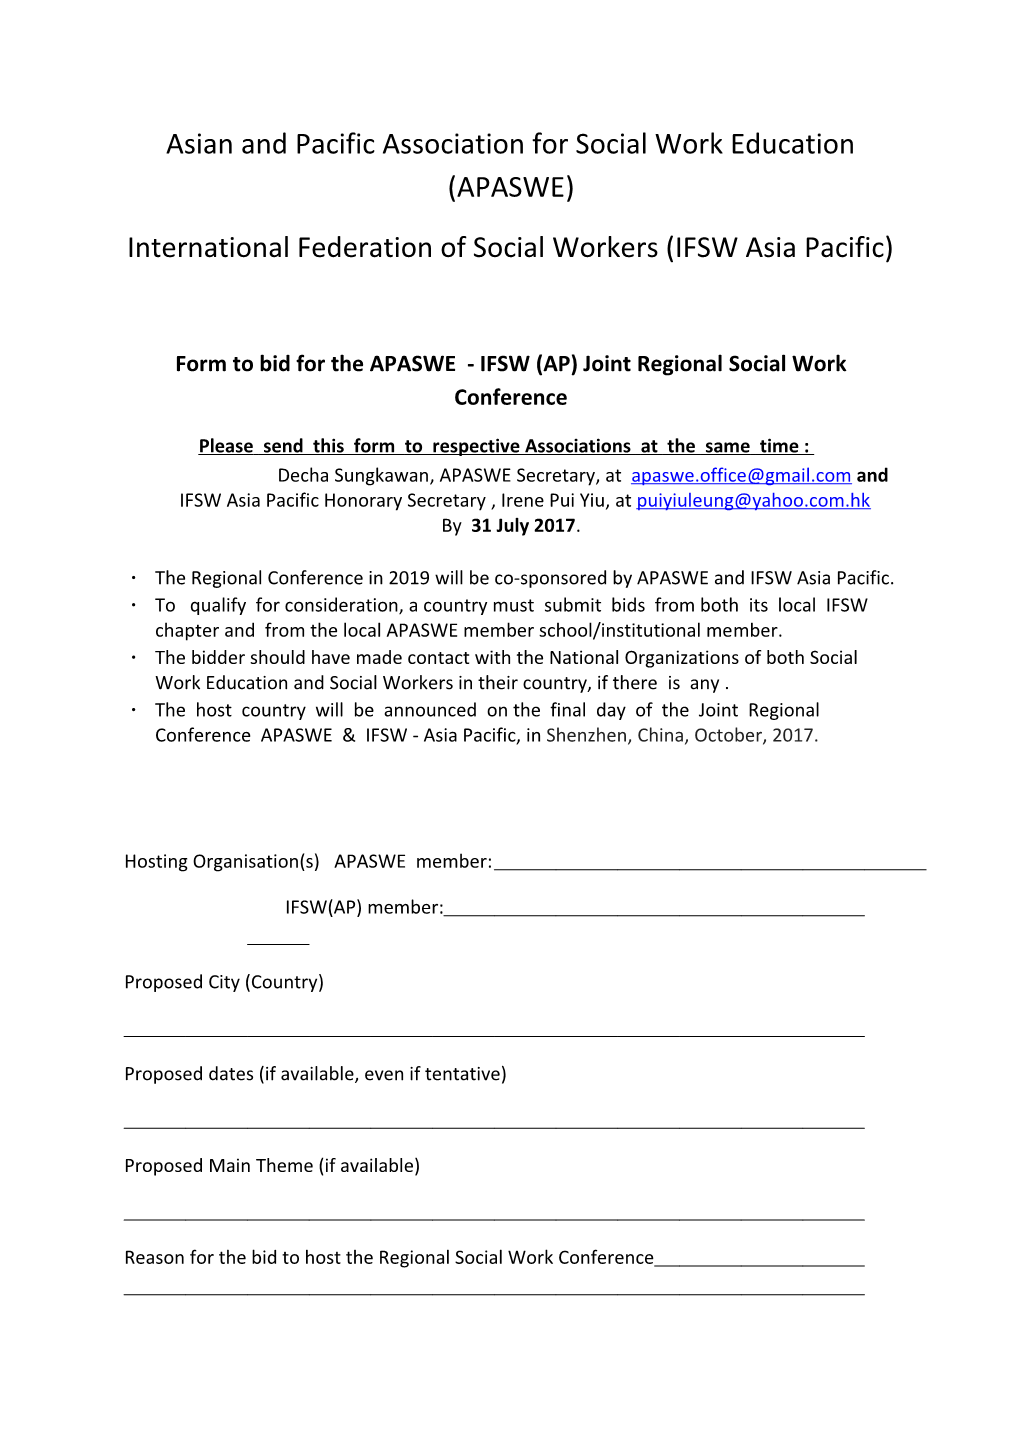 International Federation of Social Workers (Asia Pacific)